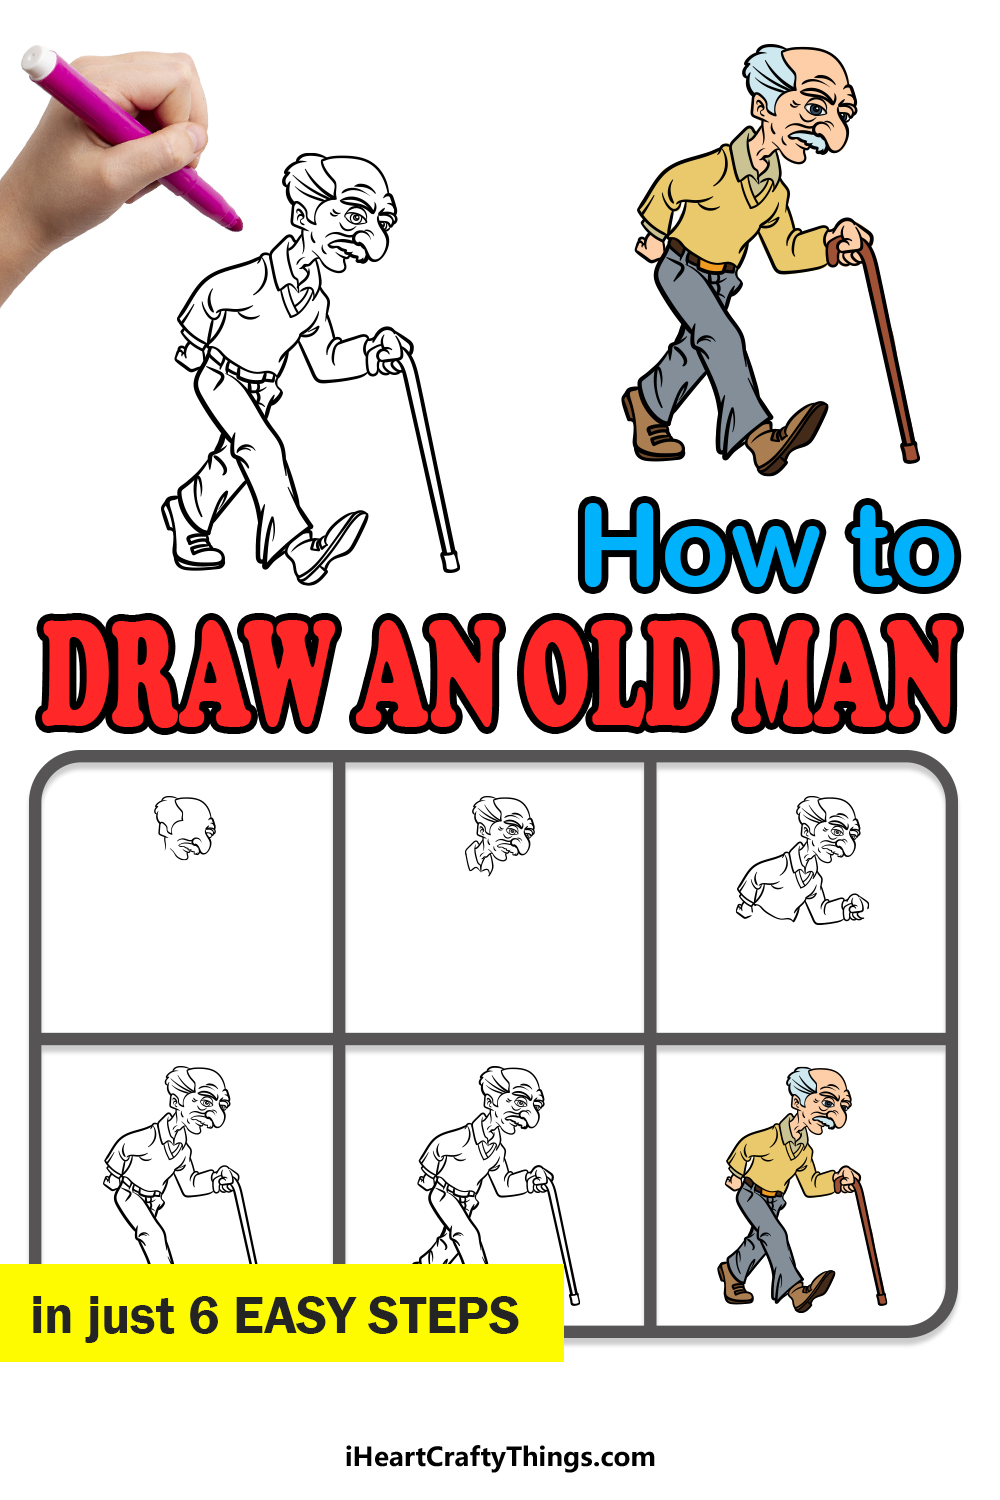 how to draw an old man in 6 easy steps